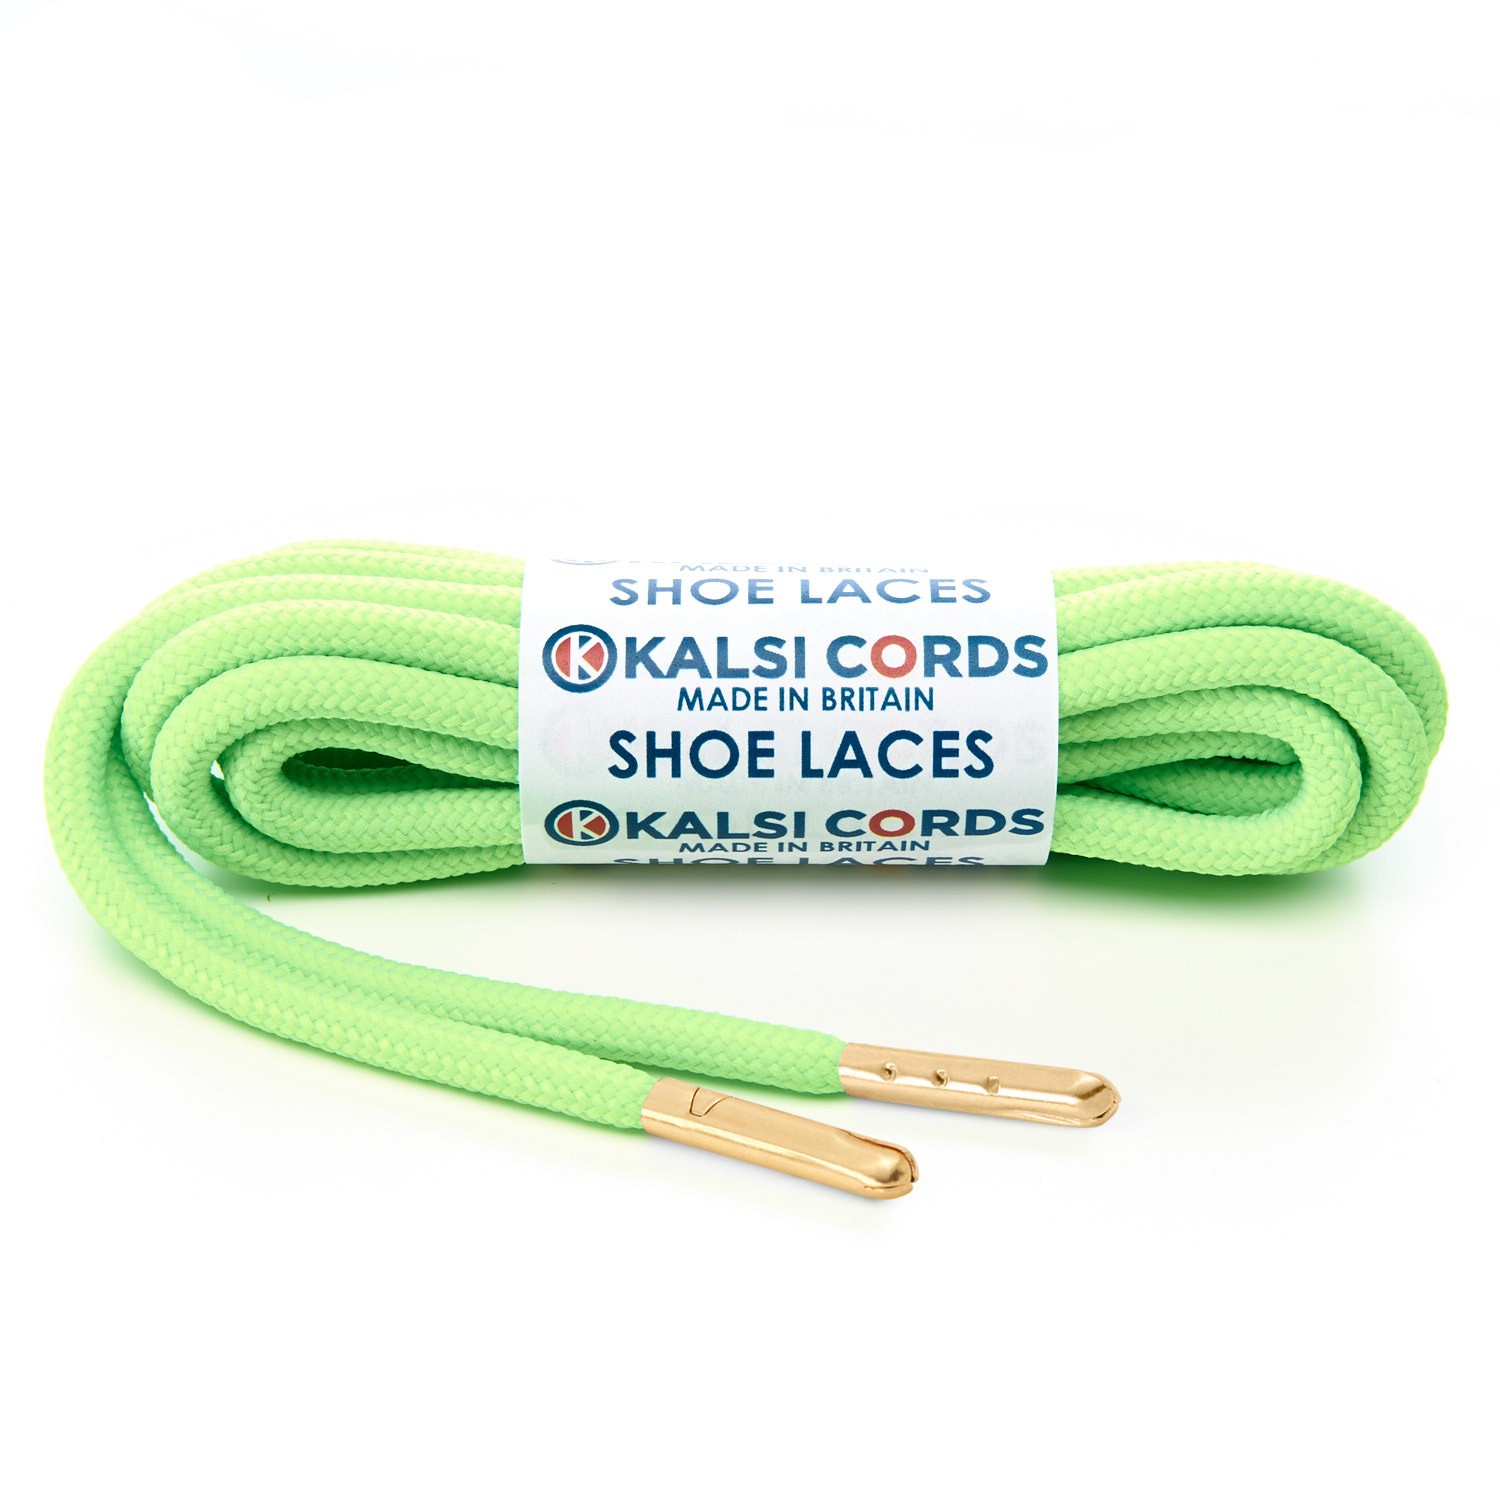 T621 5mm Round Polyester Shoe Laces Fluorescent Lime 1 Gold Metal Tip Kalsi Cords